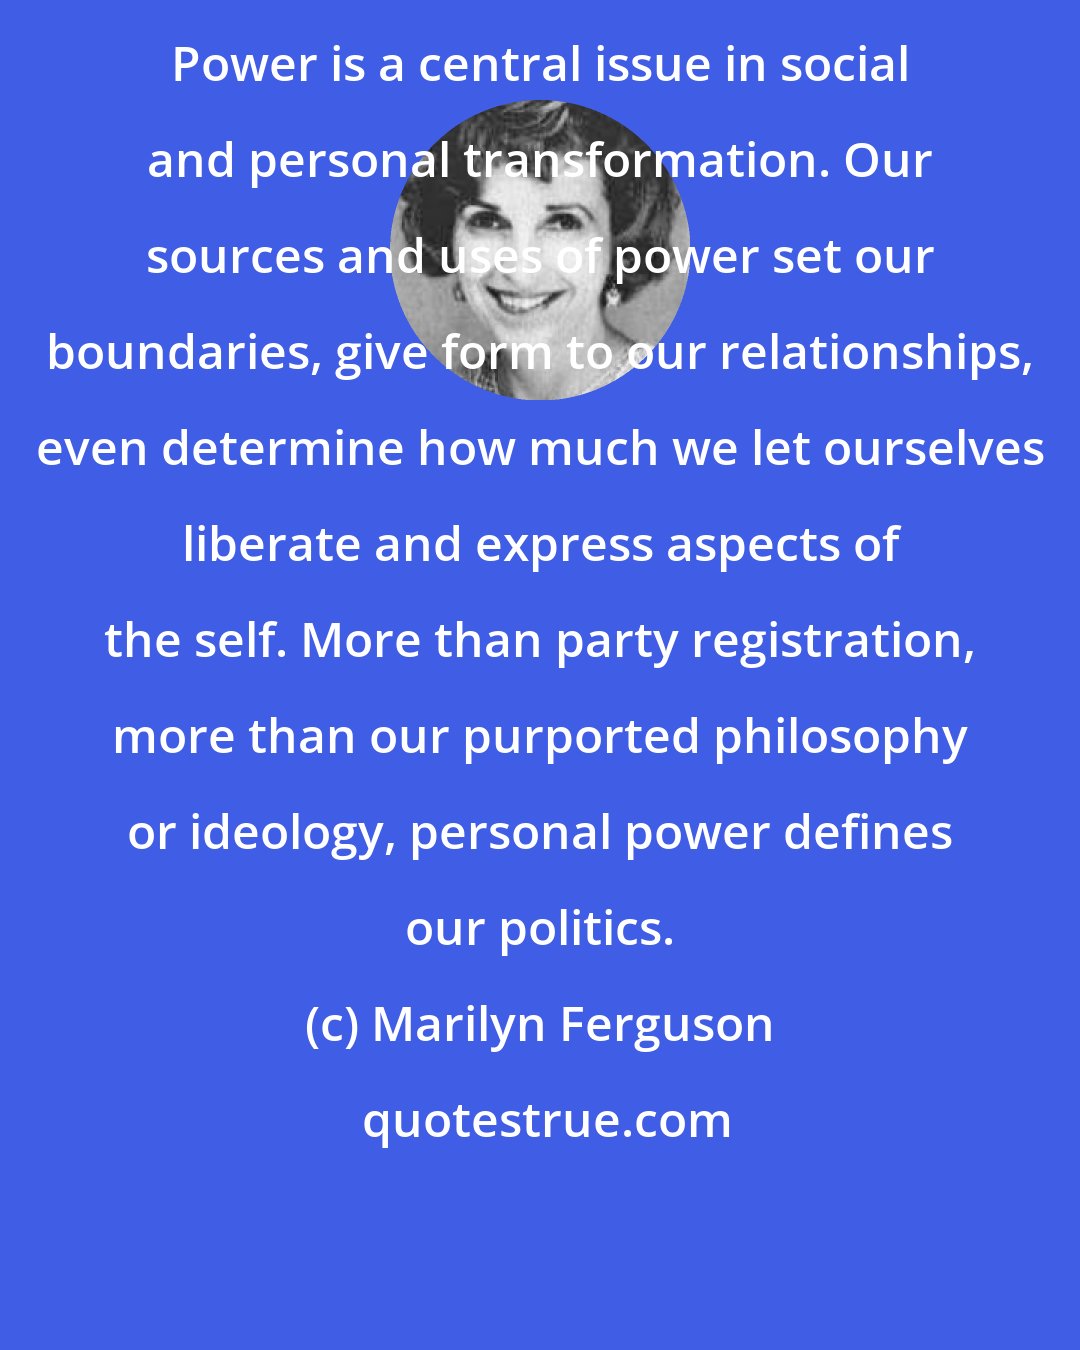 Marilyn Ferguson: Power is a central issue in social and personal transformation. Our sources and uses of power set our boundaries, give form to our relationships, even determine how much we let ourselves liberate and express aspects of the self. More than party registration, more than our purported philosophy or ideology, personal power defines our politics.